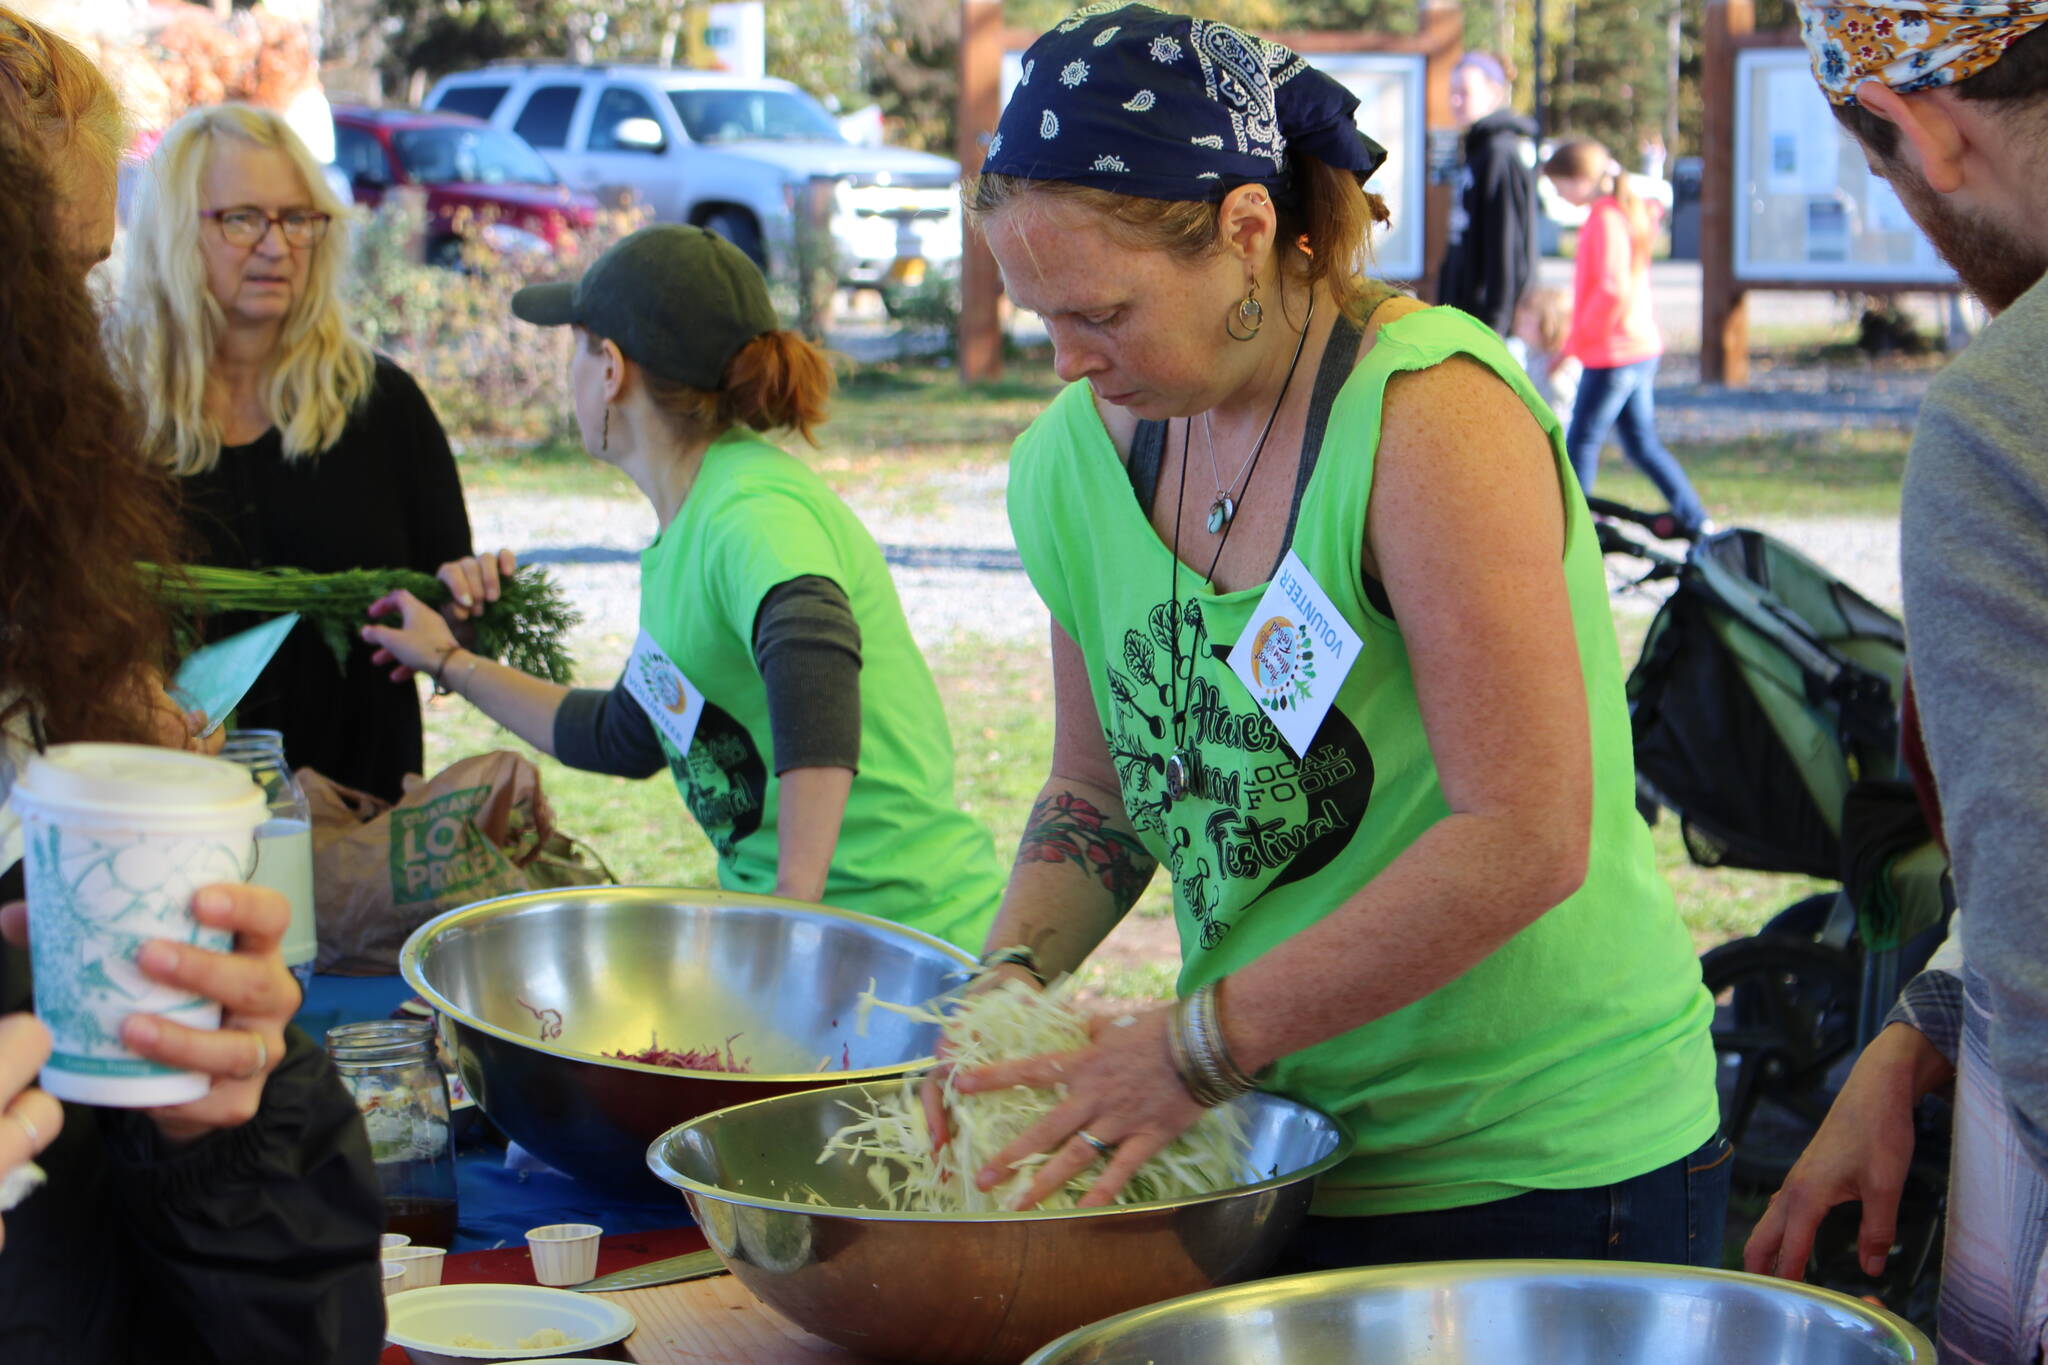 Volunteers work the fermentation station at the Harvest Moon Local Food Festival at Soldotna Creek Park on Sept. 14, 2019. (Photo by Brian Mazurek/Peninsula Clarion)